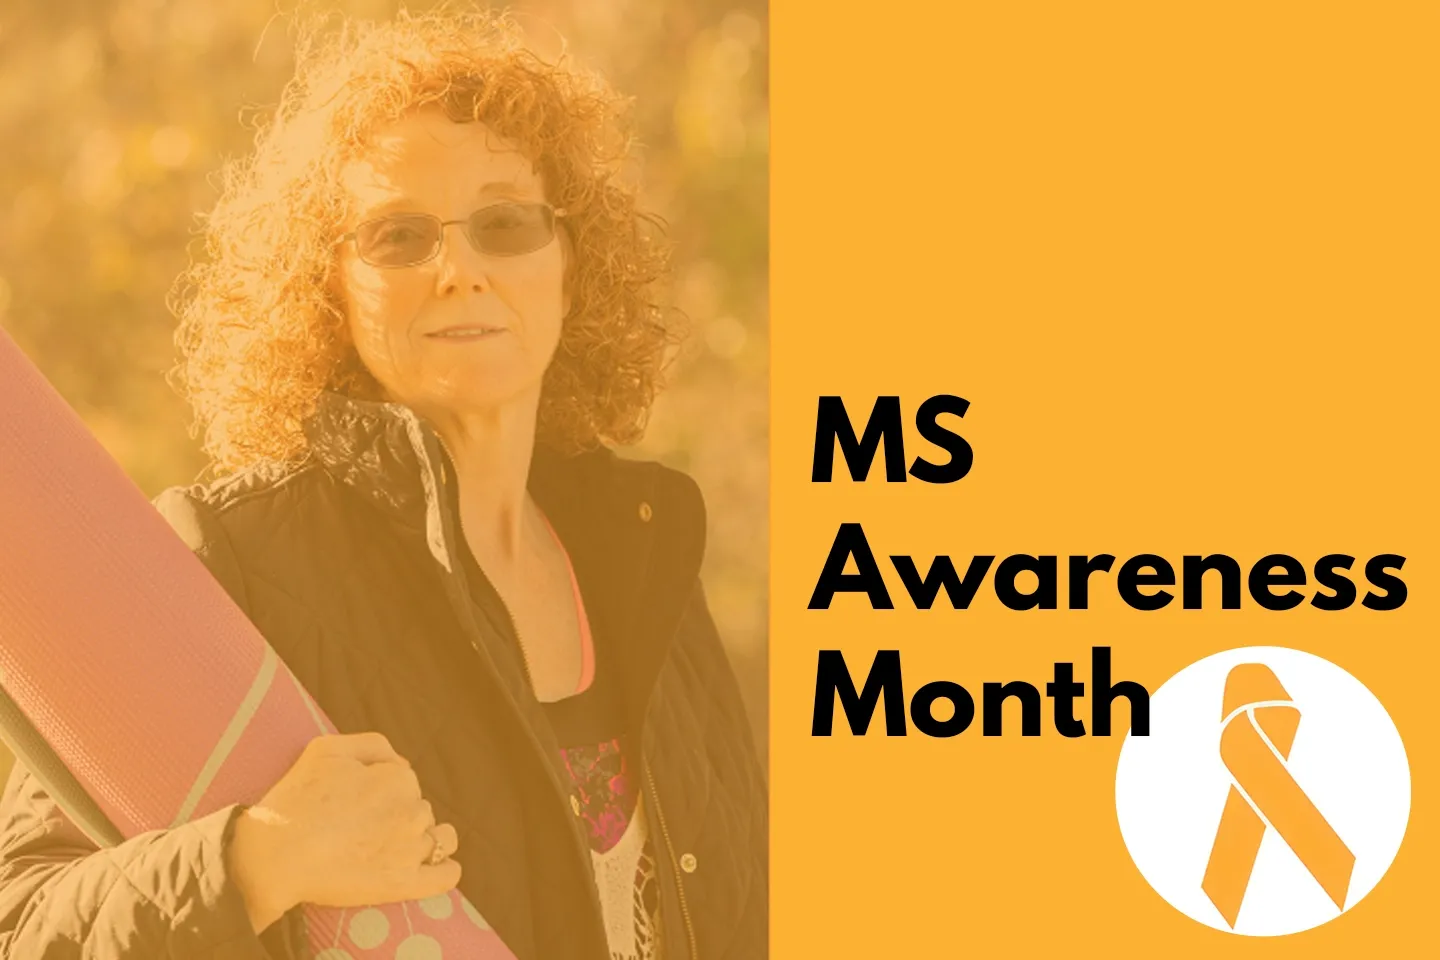 Image of woman with curly hair and glasses holding a yoga mat. Orange background with black text reads: MS Awareness Month.